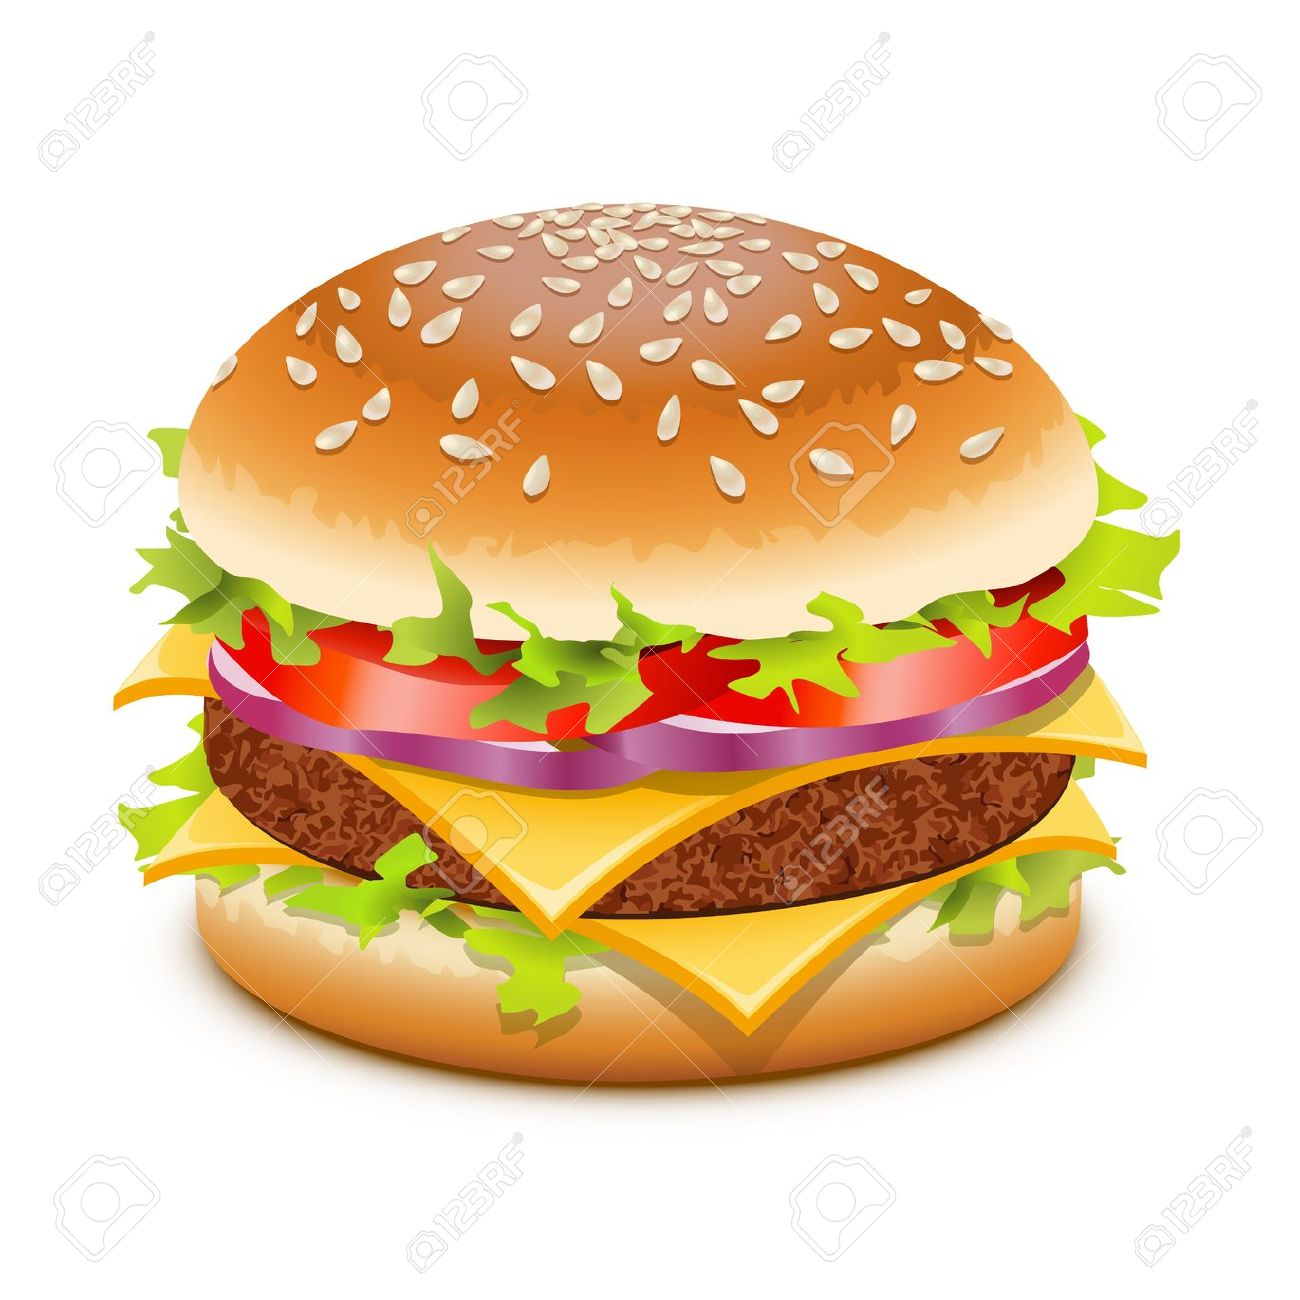 Cheeseburger clipart - Clipground